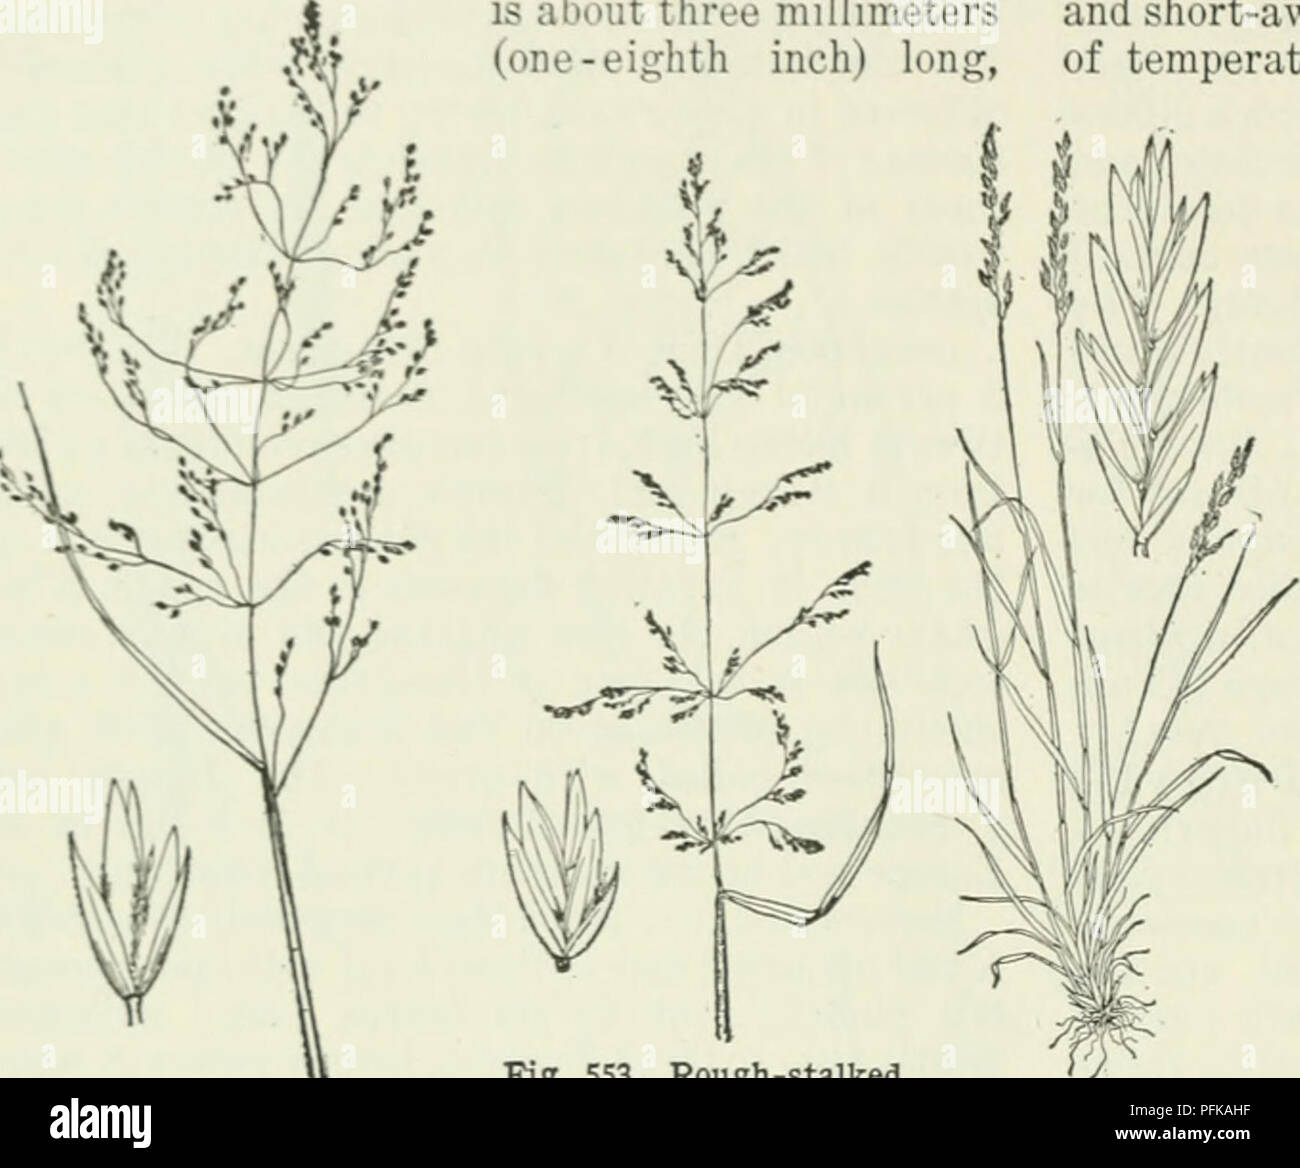 . Cyclopedia of farm crops : a popular survey of crops and crop-making methods in the United States and Canada. Agriculture -- Canada; Agriculture -- United States; Farm produce -- Canada; Farm produce -- United States. 374 GRASSES GRASSES tnflora, Gelib. (P. serotina, Ehrh.). Fowl Meadow- grass. (Fig. 5r»2.) This grass closely resembles P. ncmoralis. It usually grows taller and has a larger panicle. Frobably the best character to distinguish between the two is the ligule, which in triflora is about three millimeters (one-eighth inch) long,. Fig. 552. Fowl meadow-grass (Pnn triflora) and enlar Stock Photo